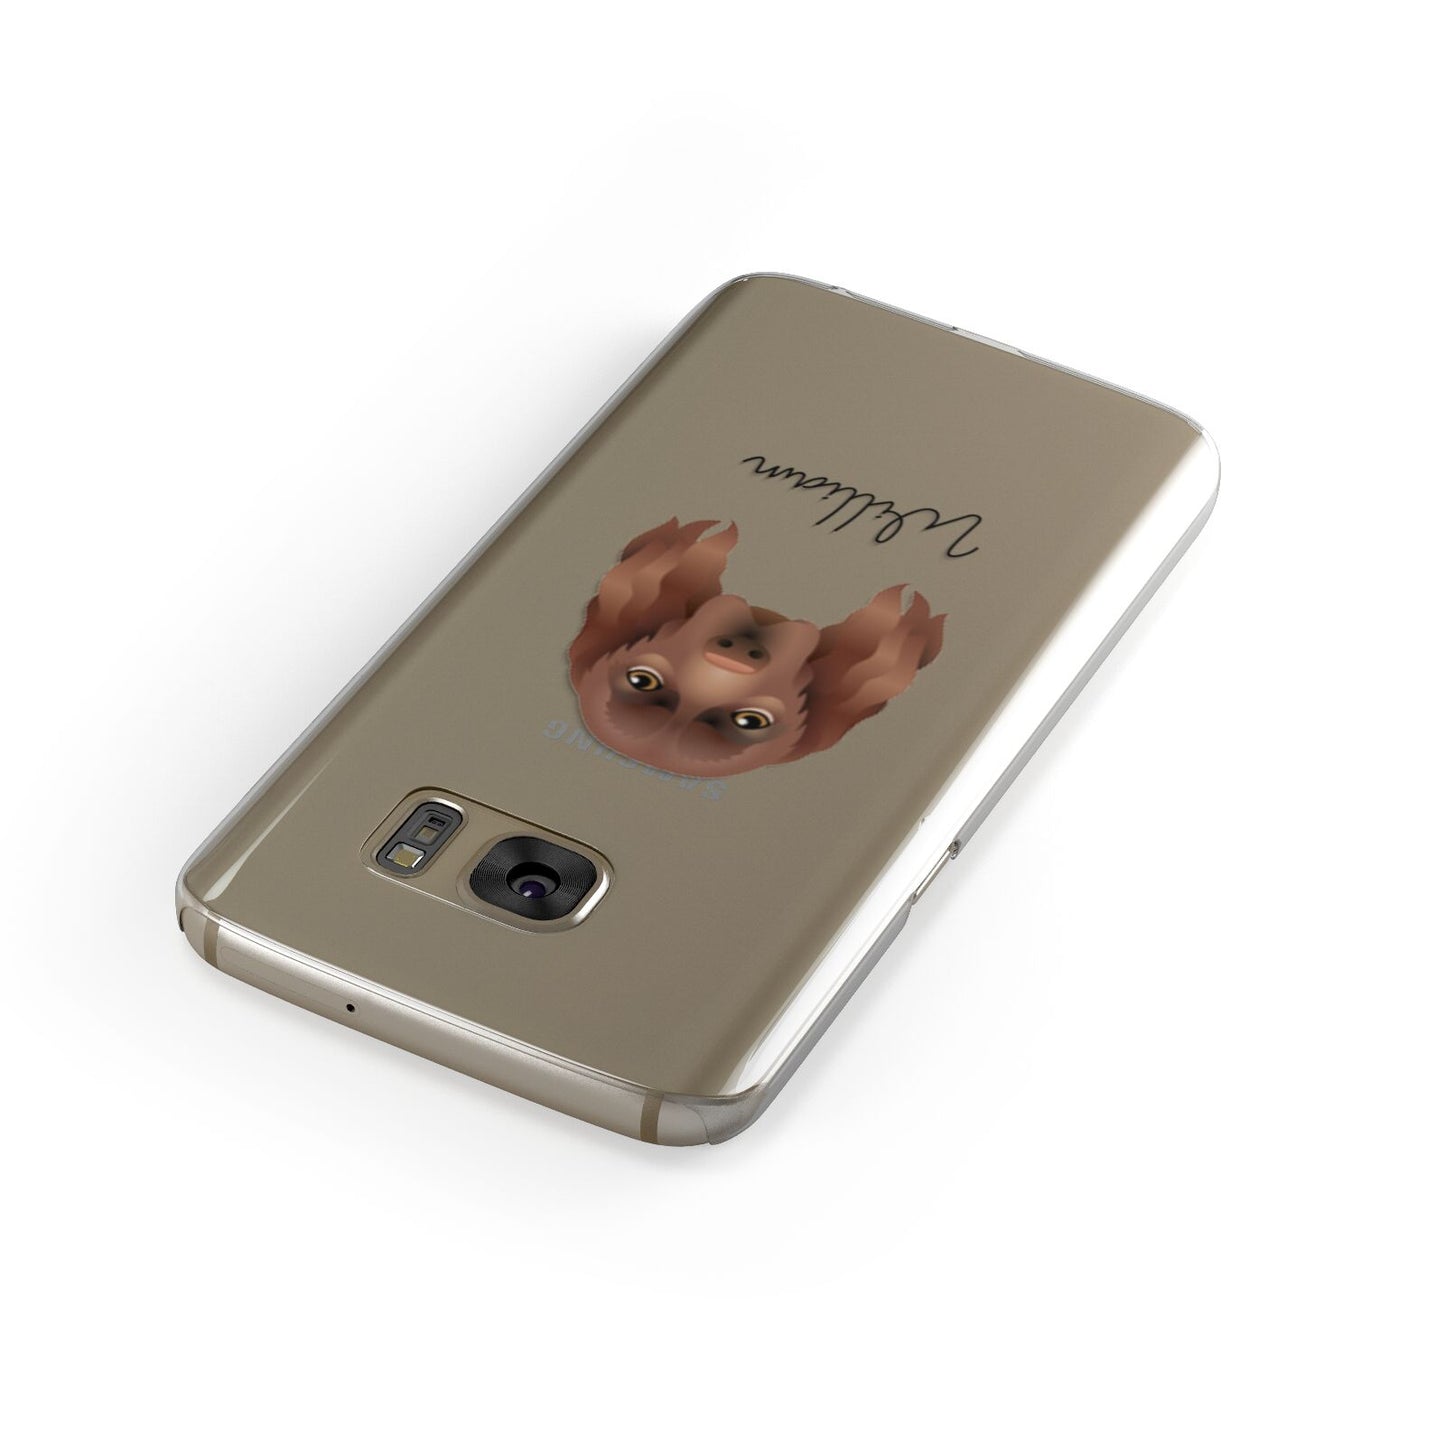 Sussex Spaniel Personalised Samsung Galaxy Case Front Close Up